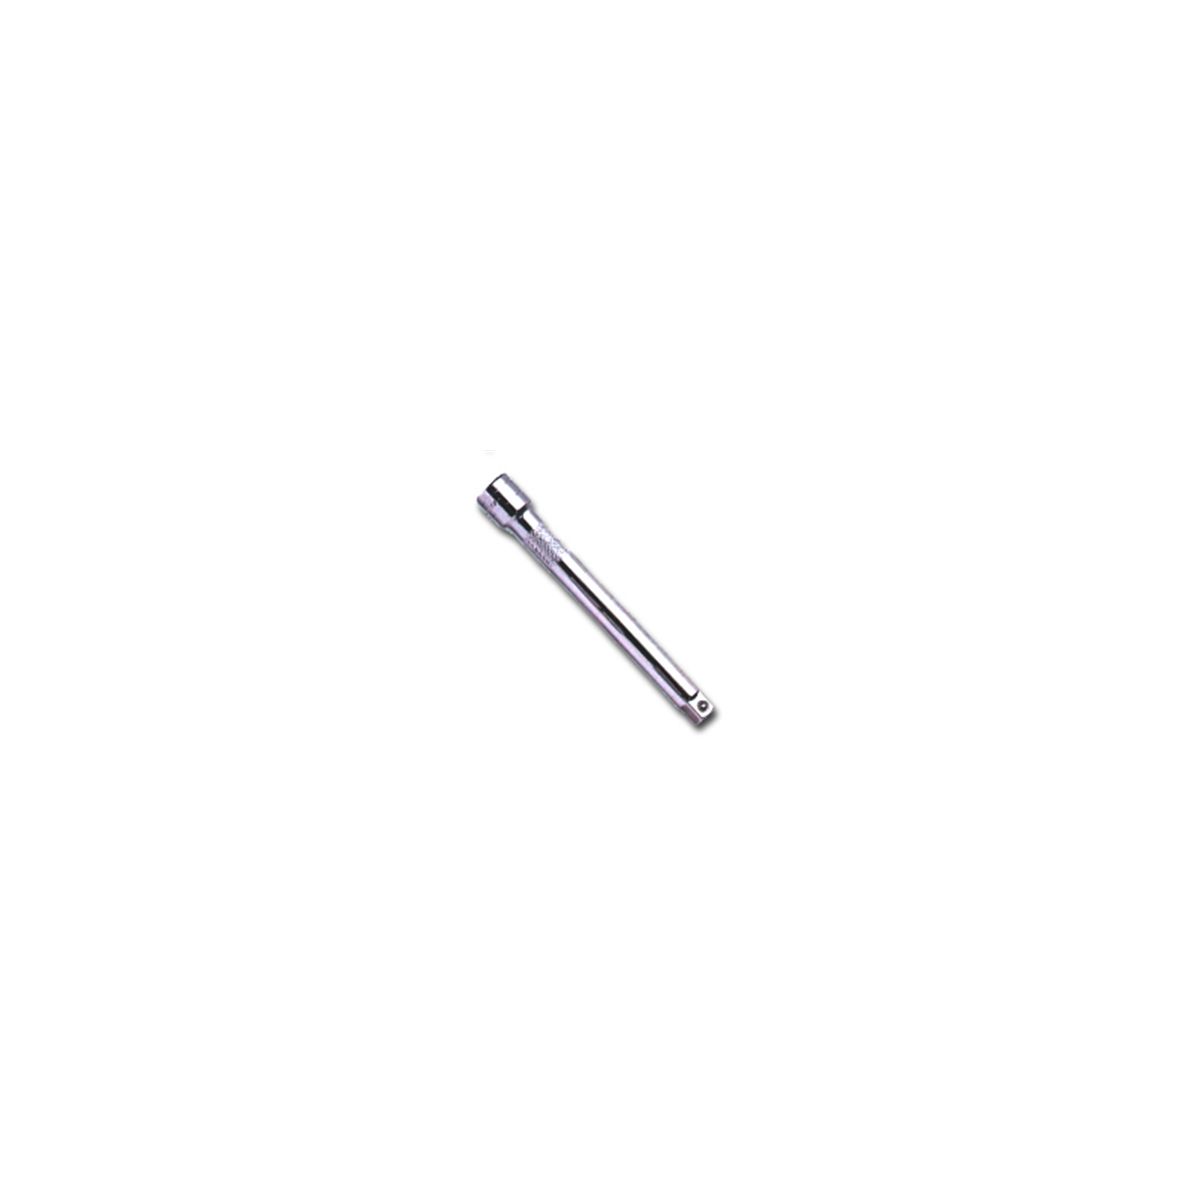 1/4 Inch Drive Wobble Extension 1.5 Inch